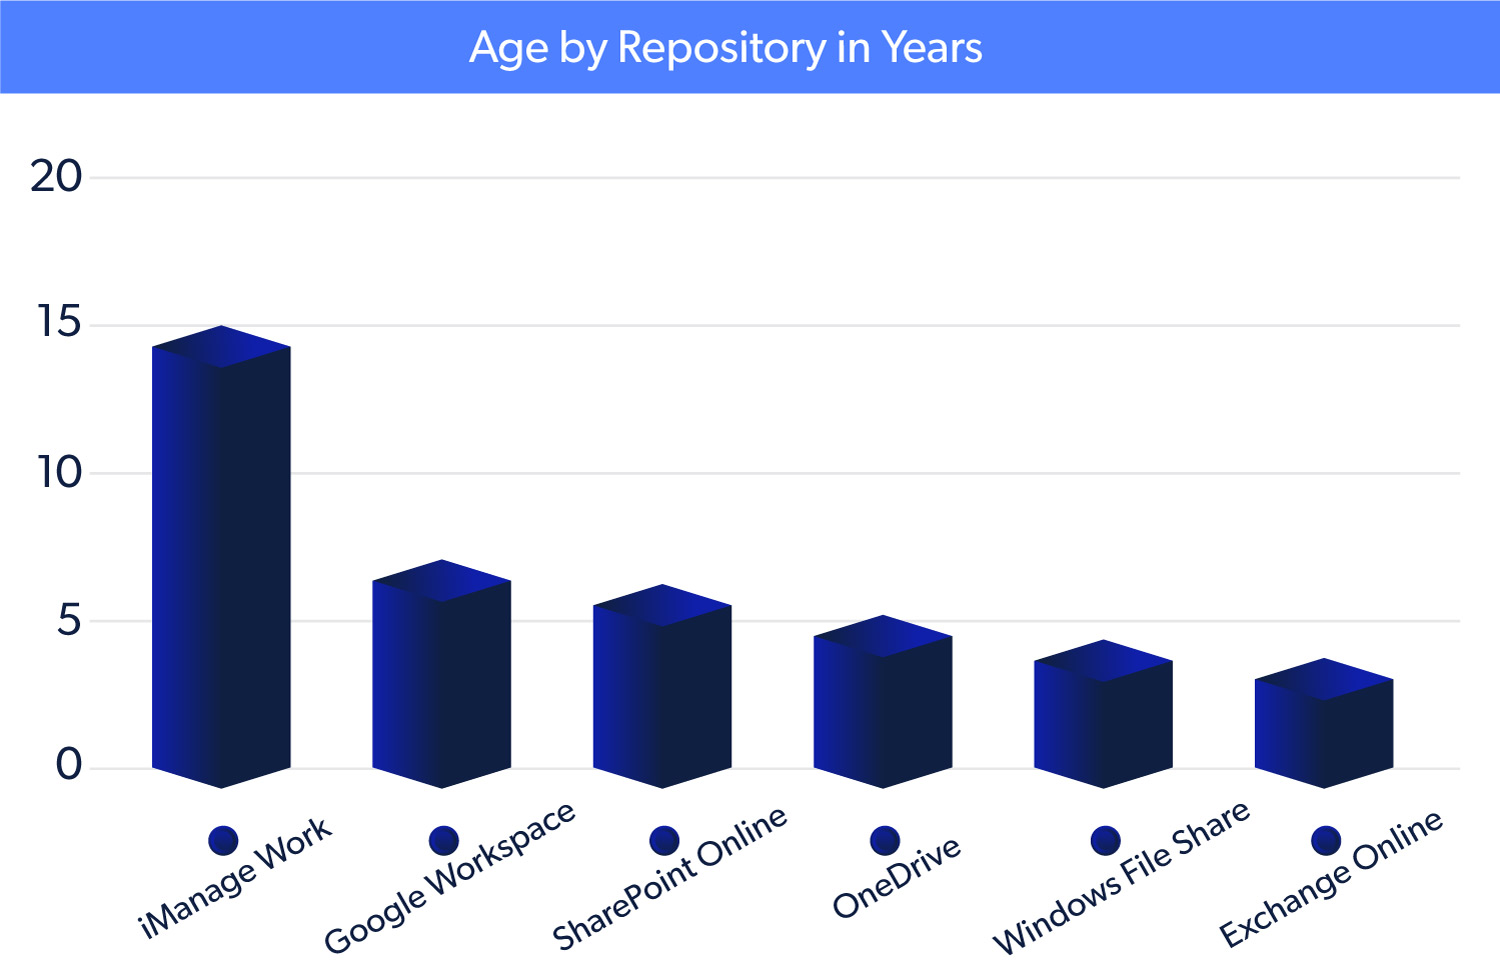 Age-by-Repository-in-Years-1